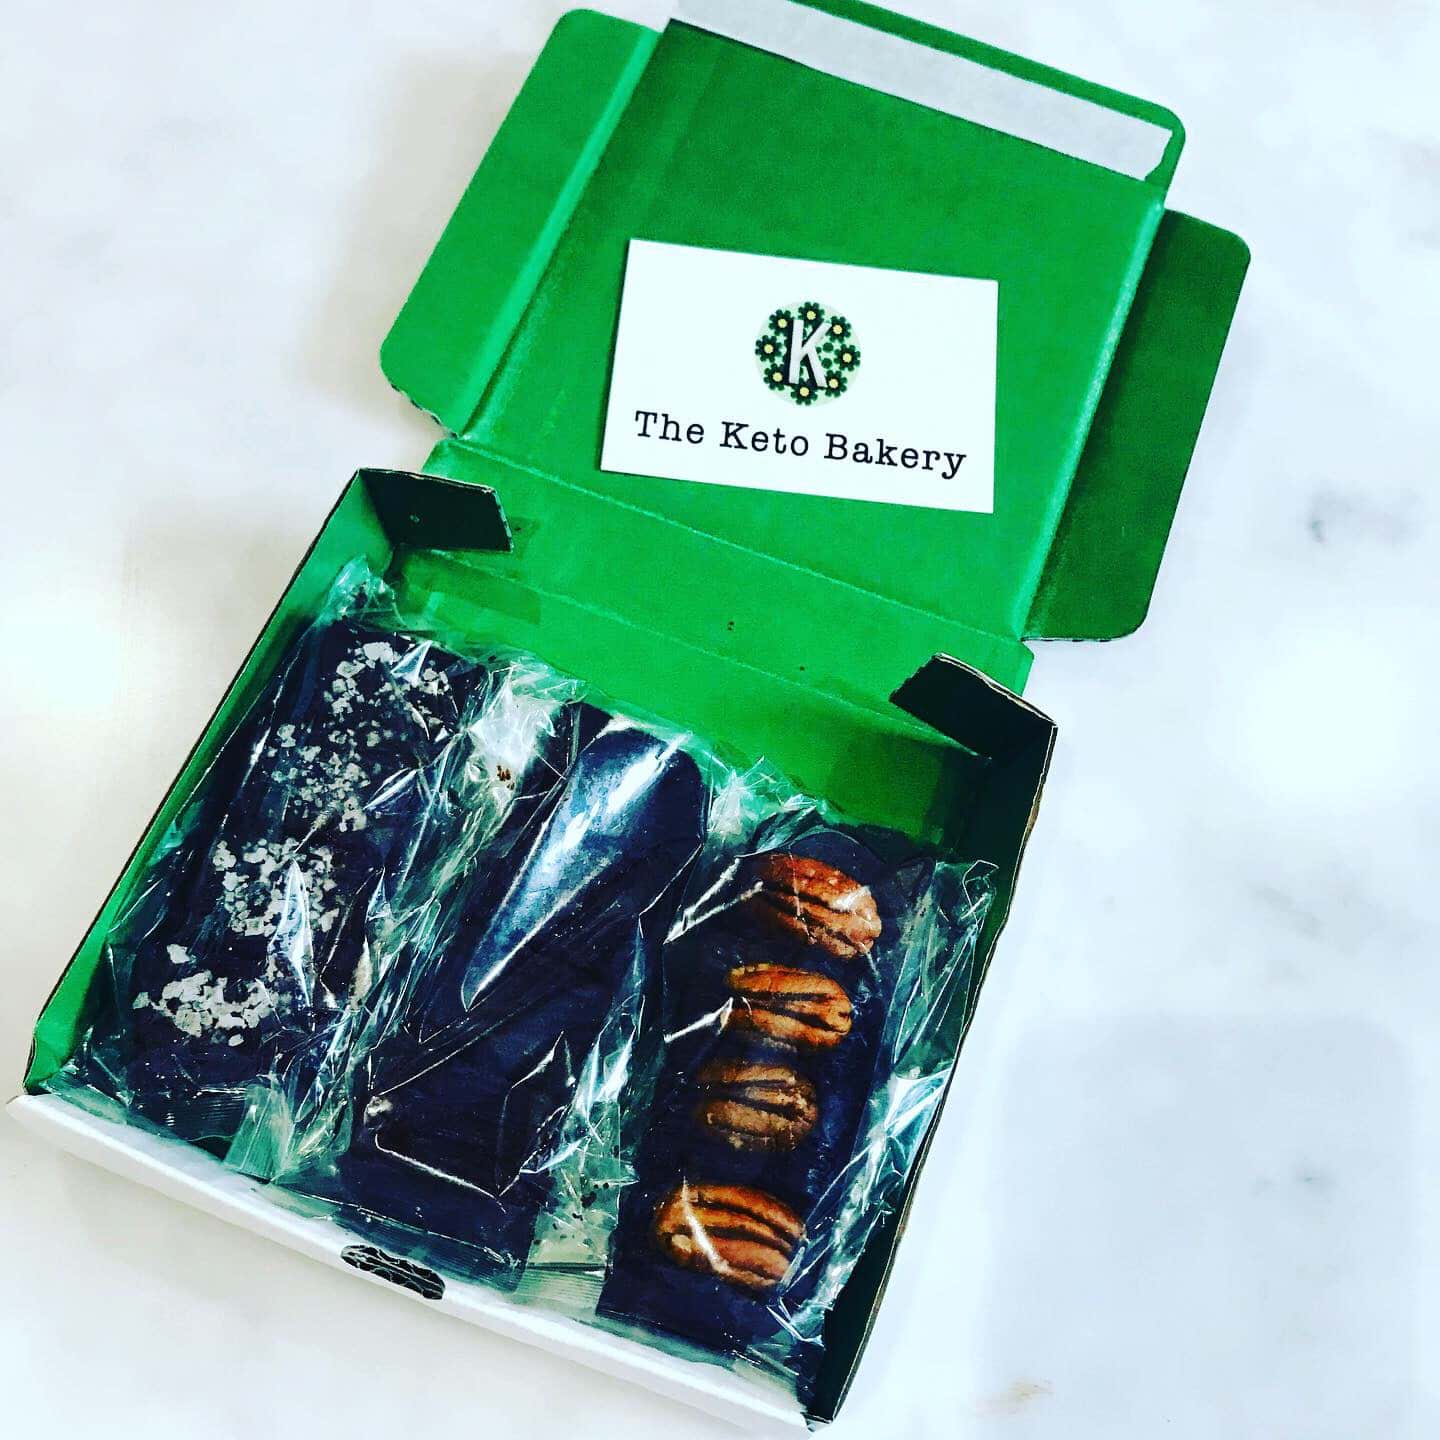 green card posting box of 12 Chocketos - brownie bites from The Keto Bakery wrapped in cellophane.. 4 are topped with pecan slices, 4 are topped with seasalt sprinkle. There is a small white card with The Keto bakery logo inside the box.